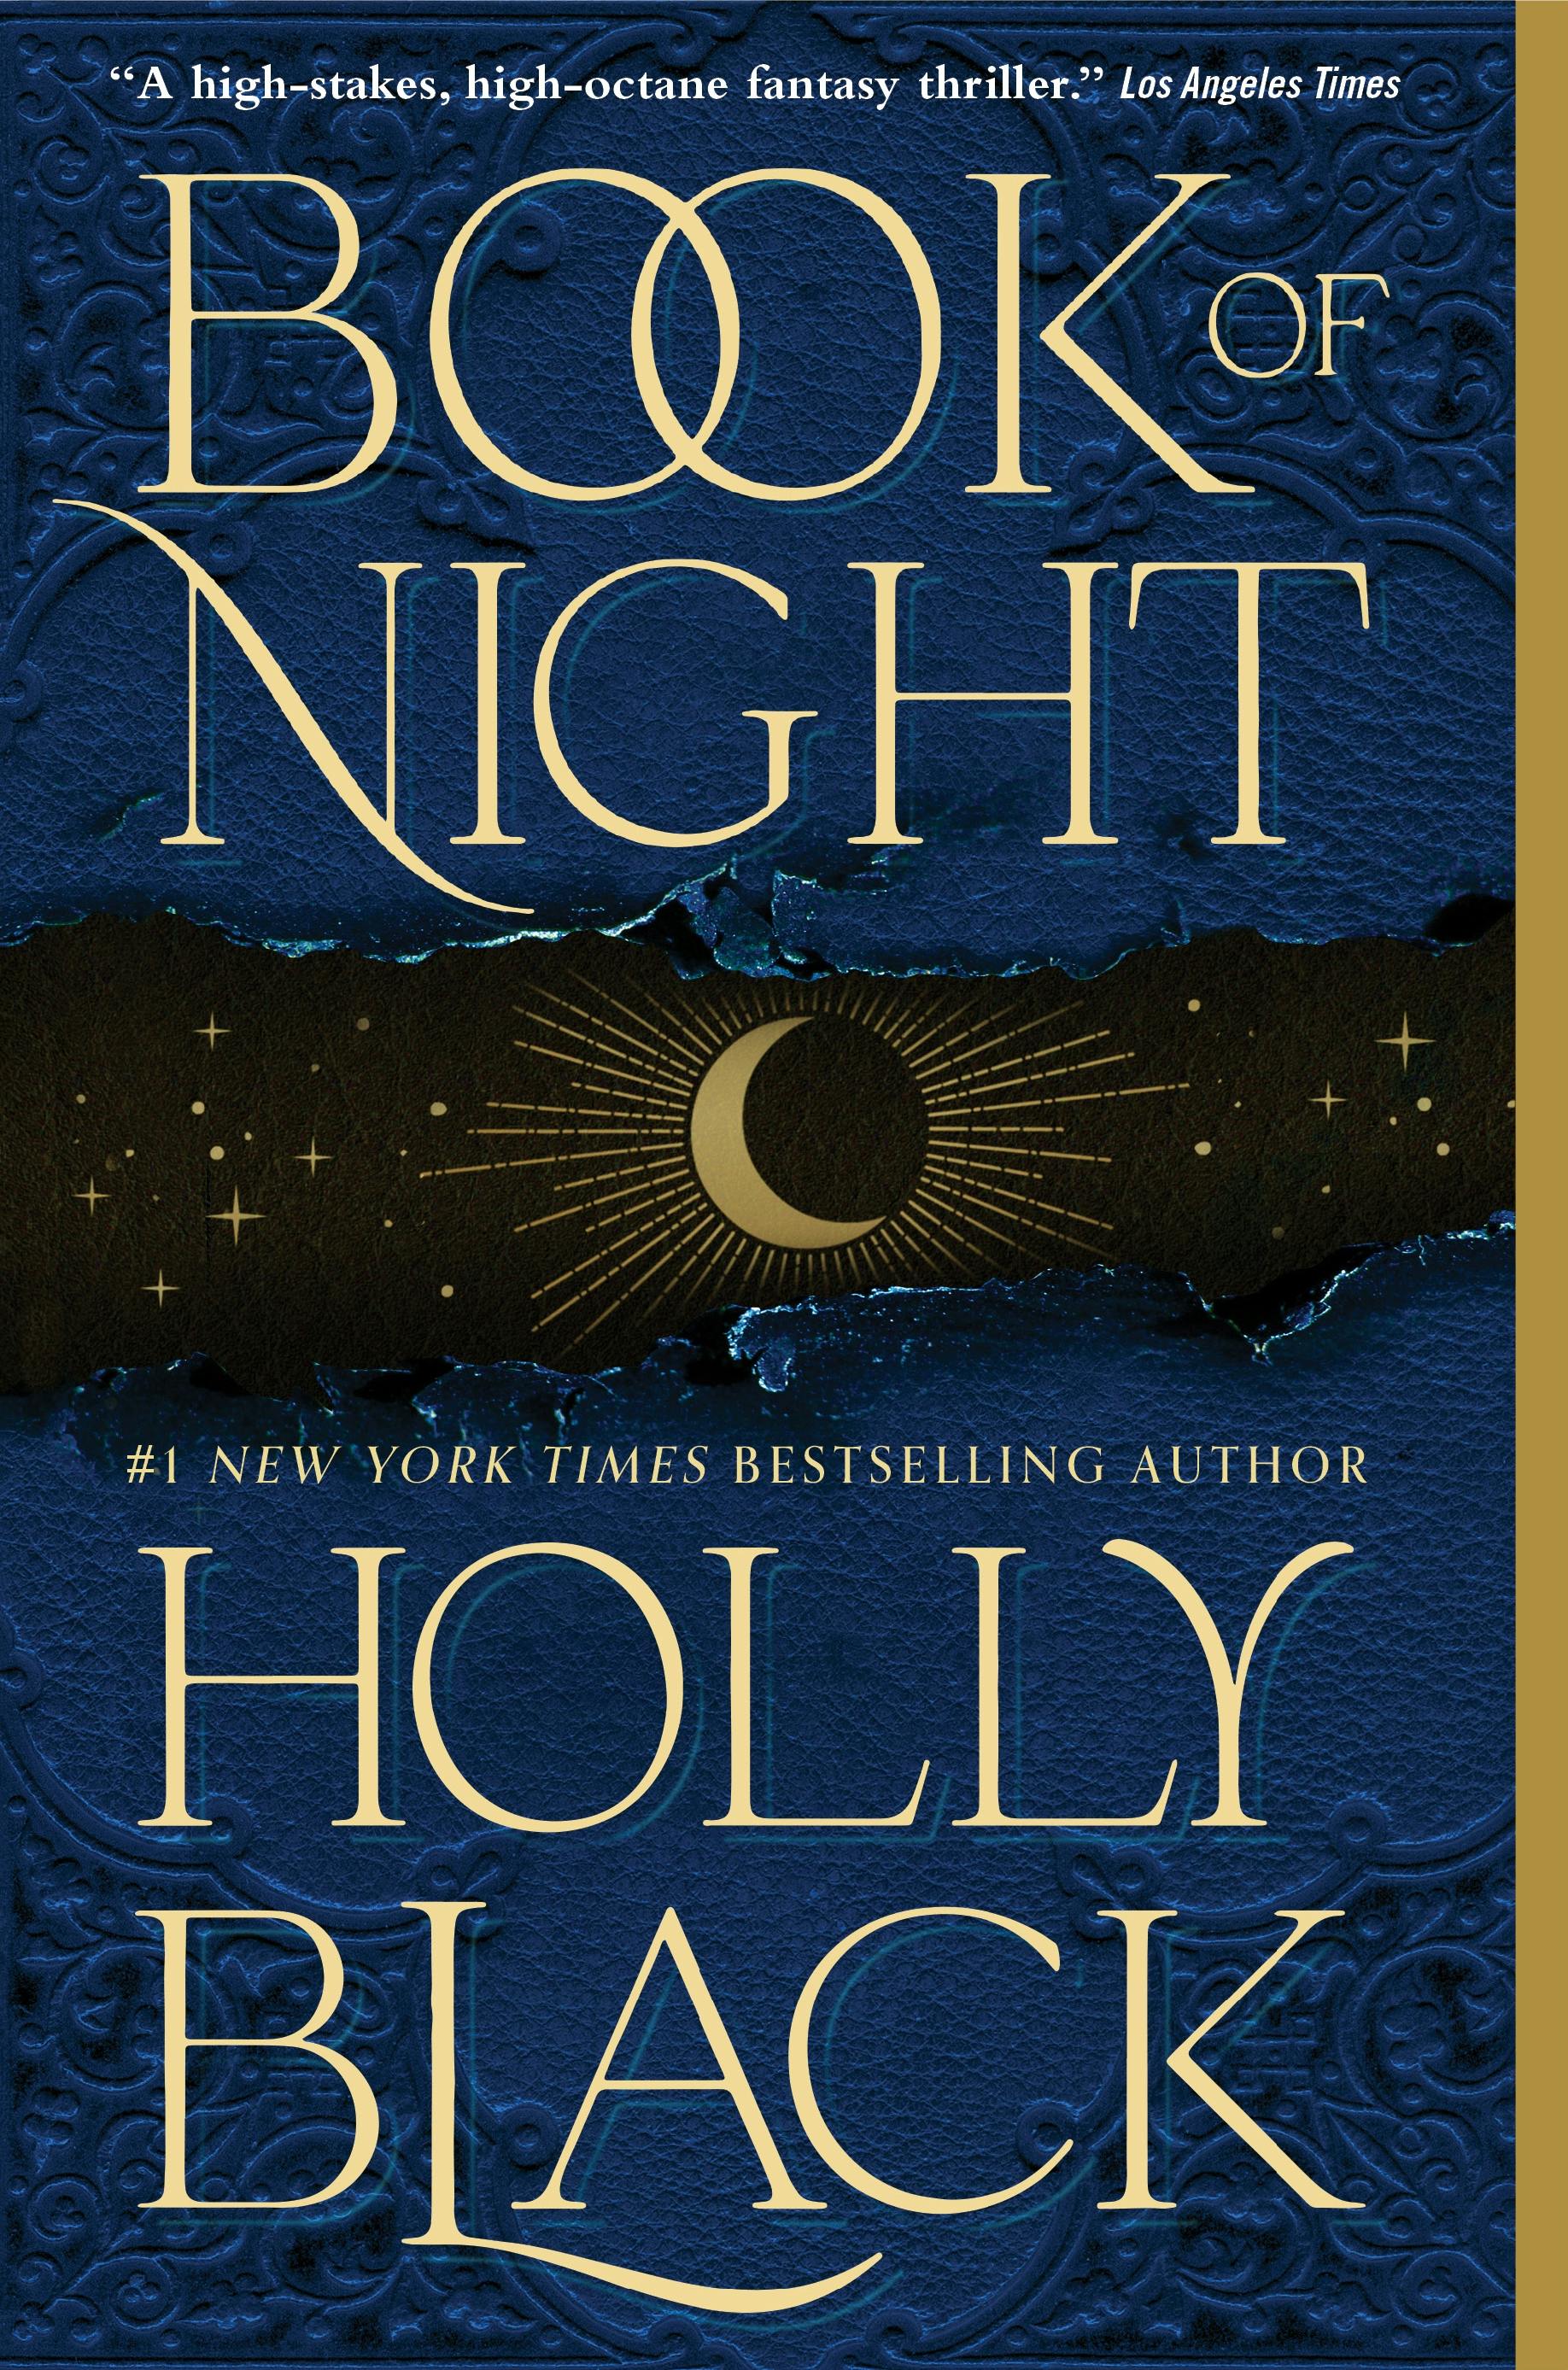 Book of Night pic